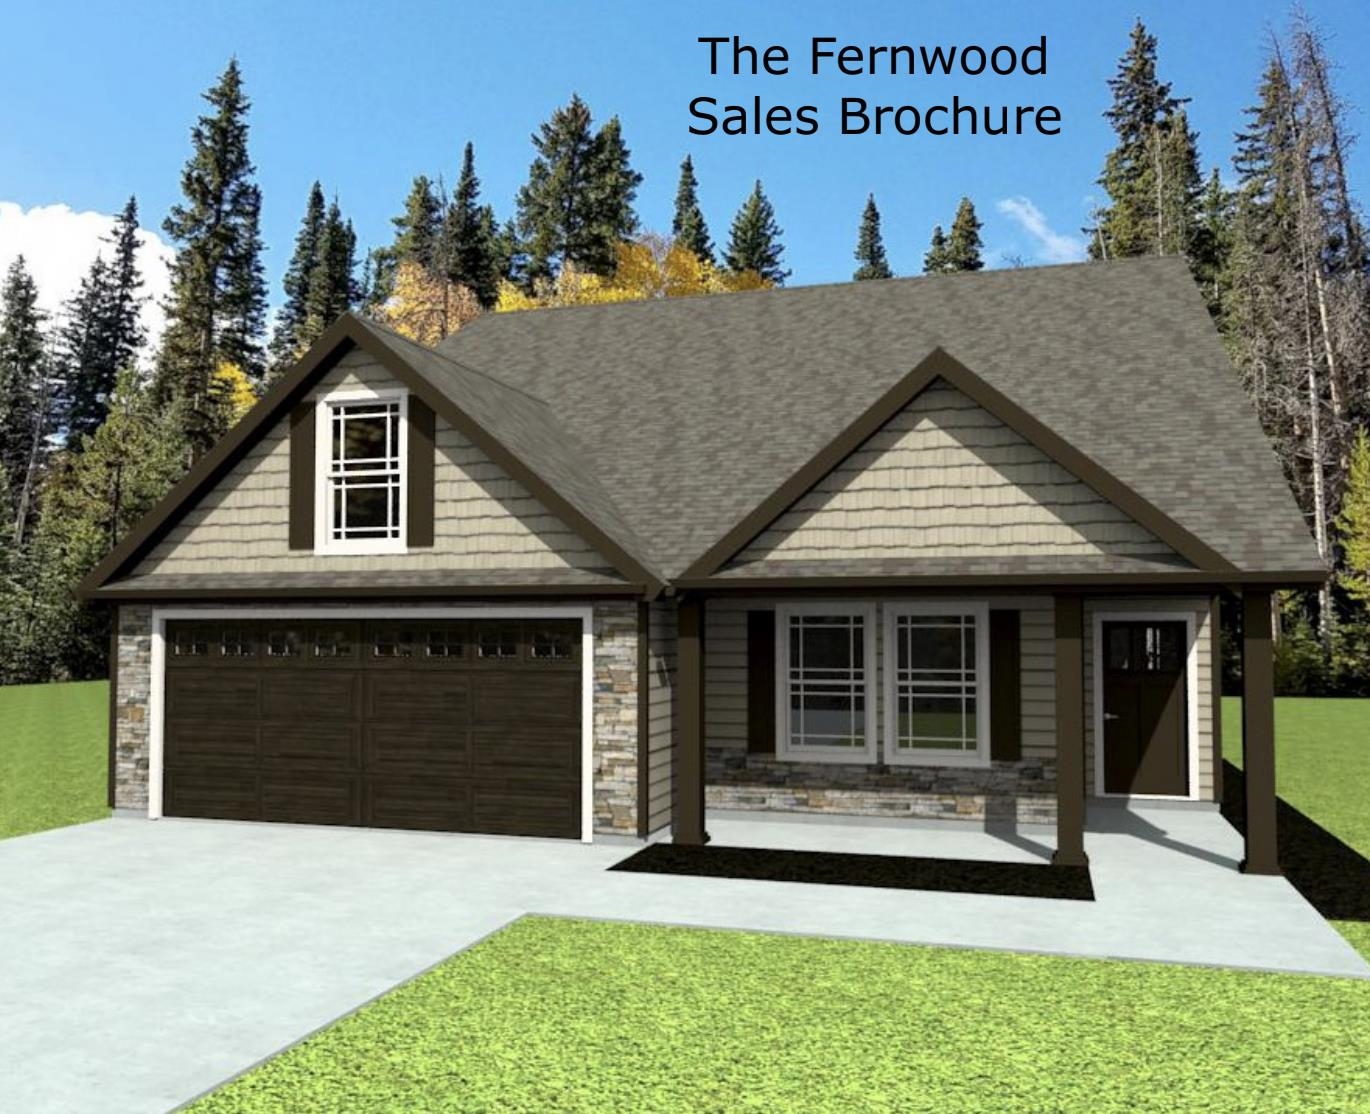 The FERNWOOD plan with an upgraded covered patio, sunroom & Ext garage. 3bedrooms & 2 baths. Large open living space. Granite countertops, painted cabinets, LVP flooring, detailed moldings, and a cozy fireplace included. Other lots and homes available. Closing cost incentives available when working with preferred lender and attorney. Call for details! Lot 32